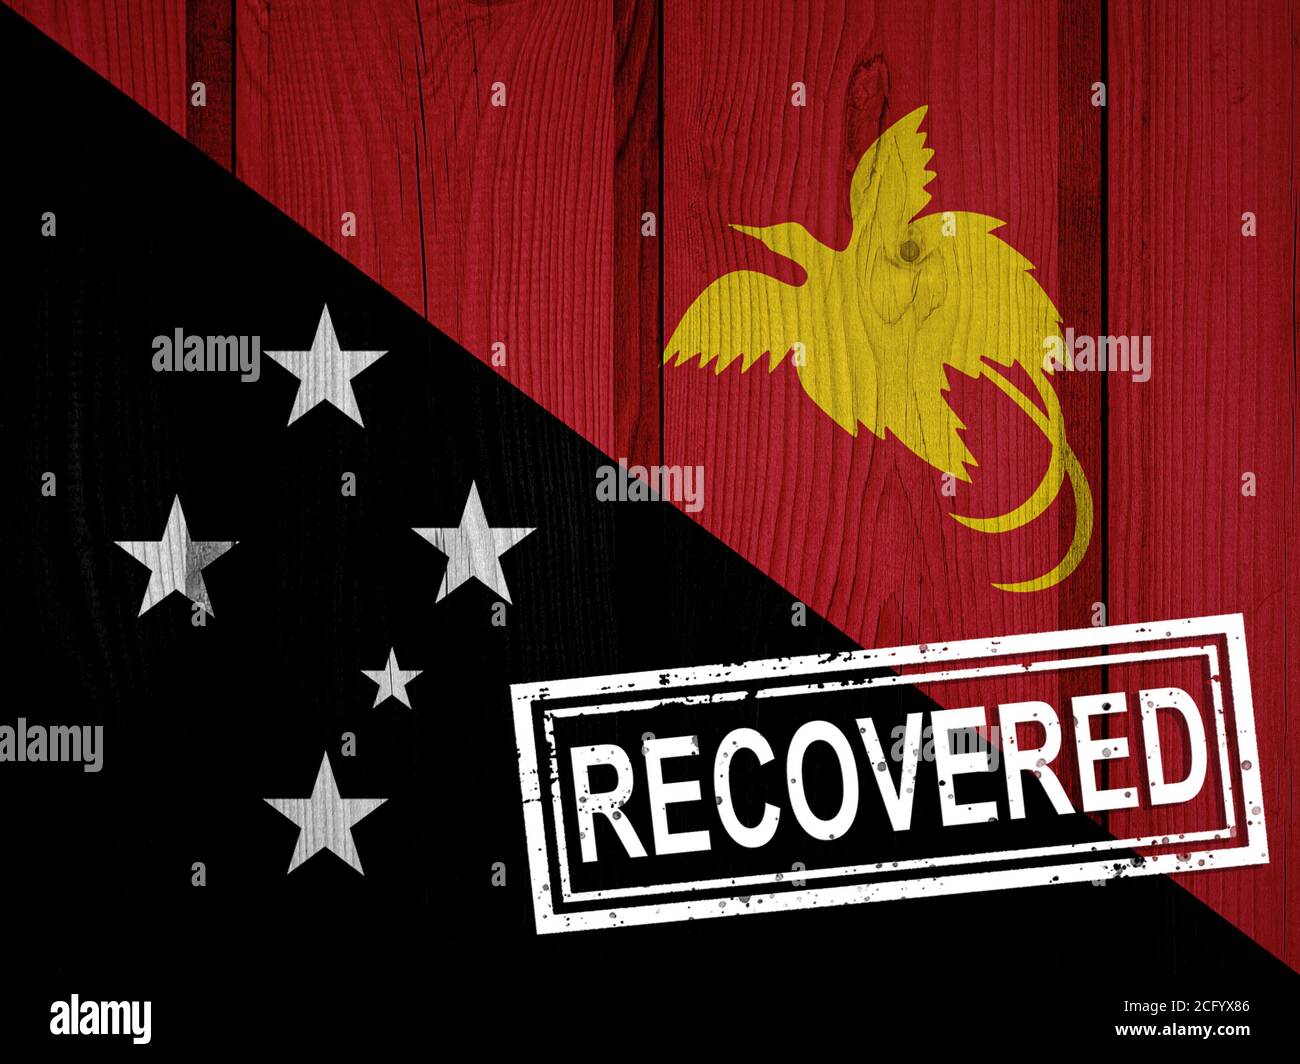 flag of Papua New Guinea that survived or recovered from the infections of corona virus epidemic or coronavirus. Grunge flag with stamp Recovered Stock Photo